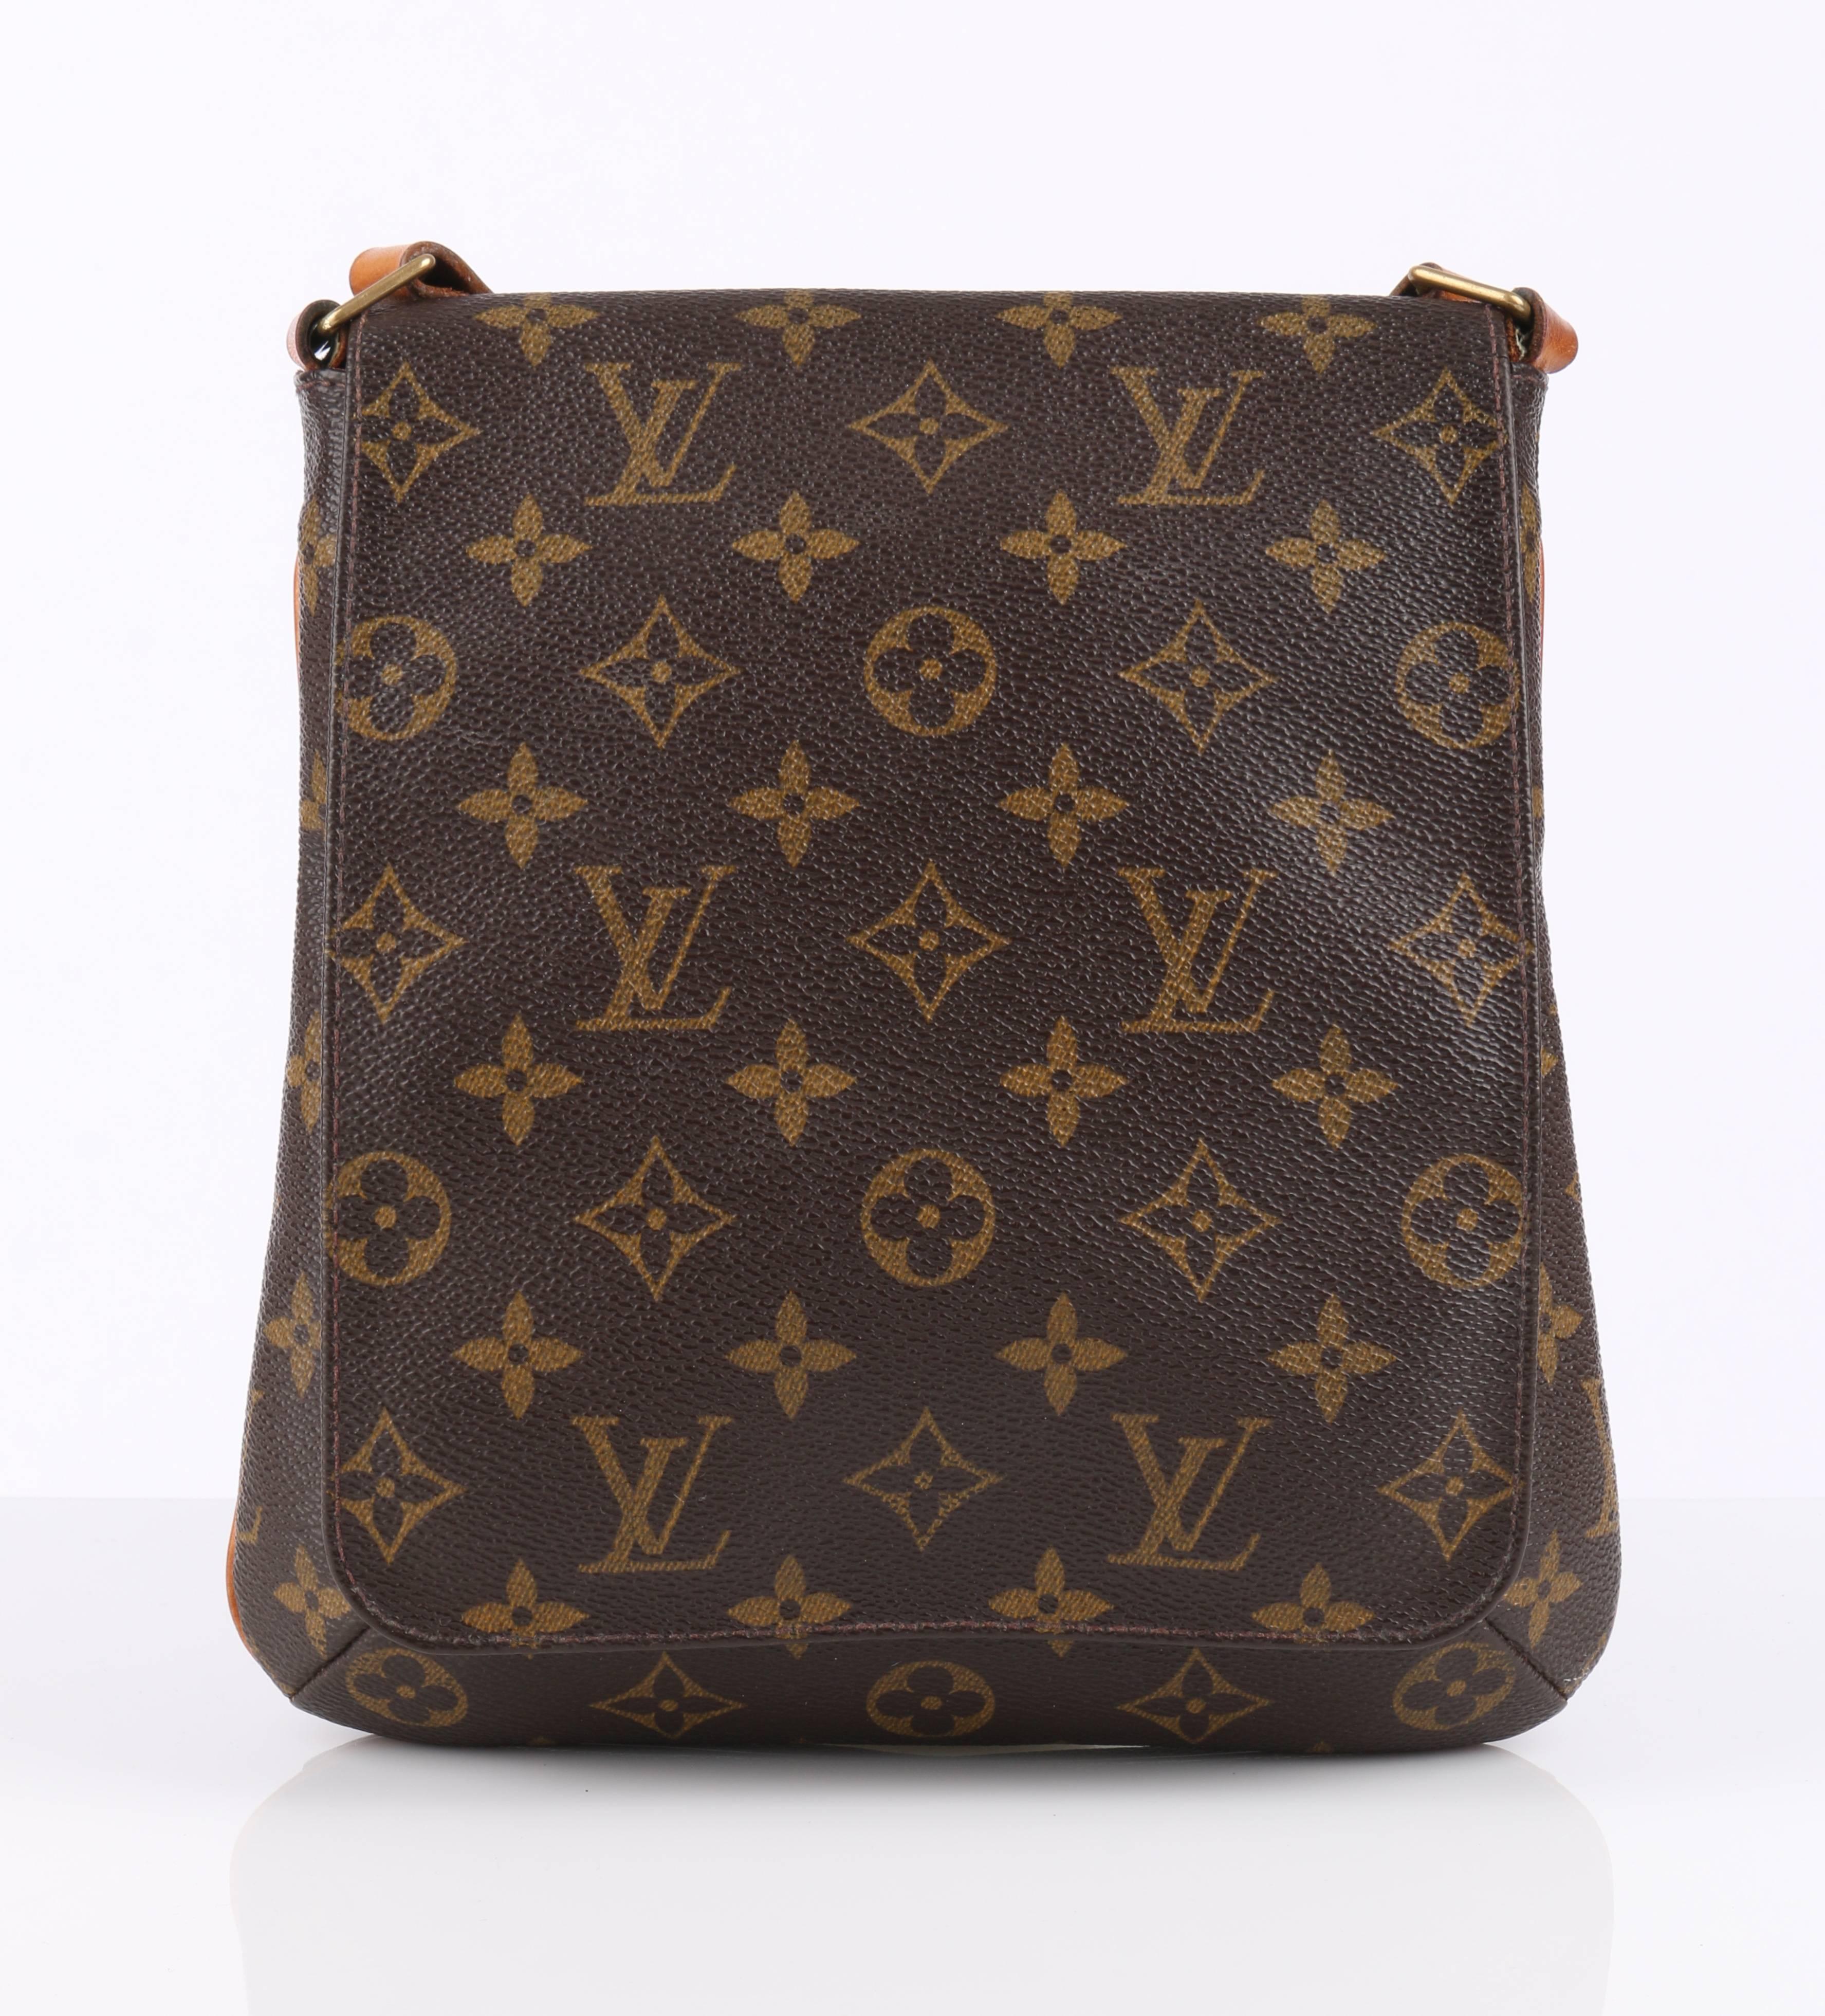 Louis Vuitton c.1998 monogram coated canvas "Musette Salsa" shoulder handbag. Front flap with magnetic snap button closure. Brown Alcantara interior lining. Open interior inset pocket. Adjustable vachetta leather strap and trim detail.